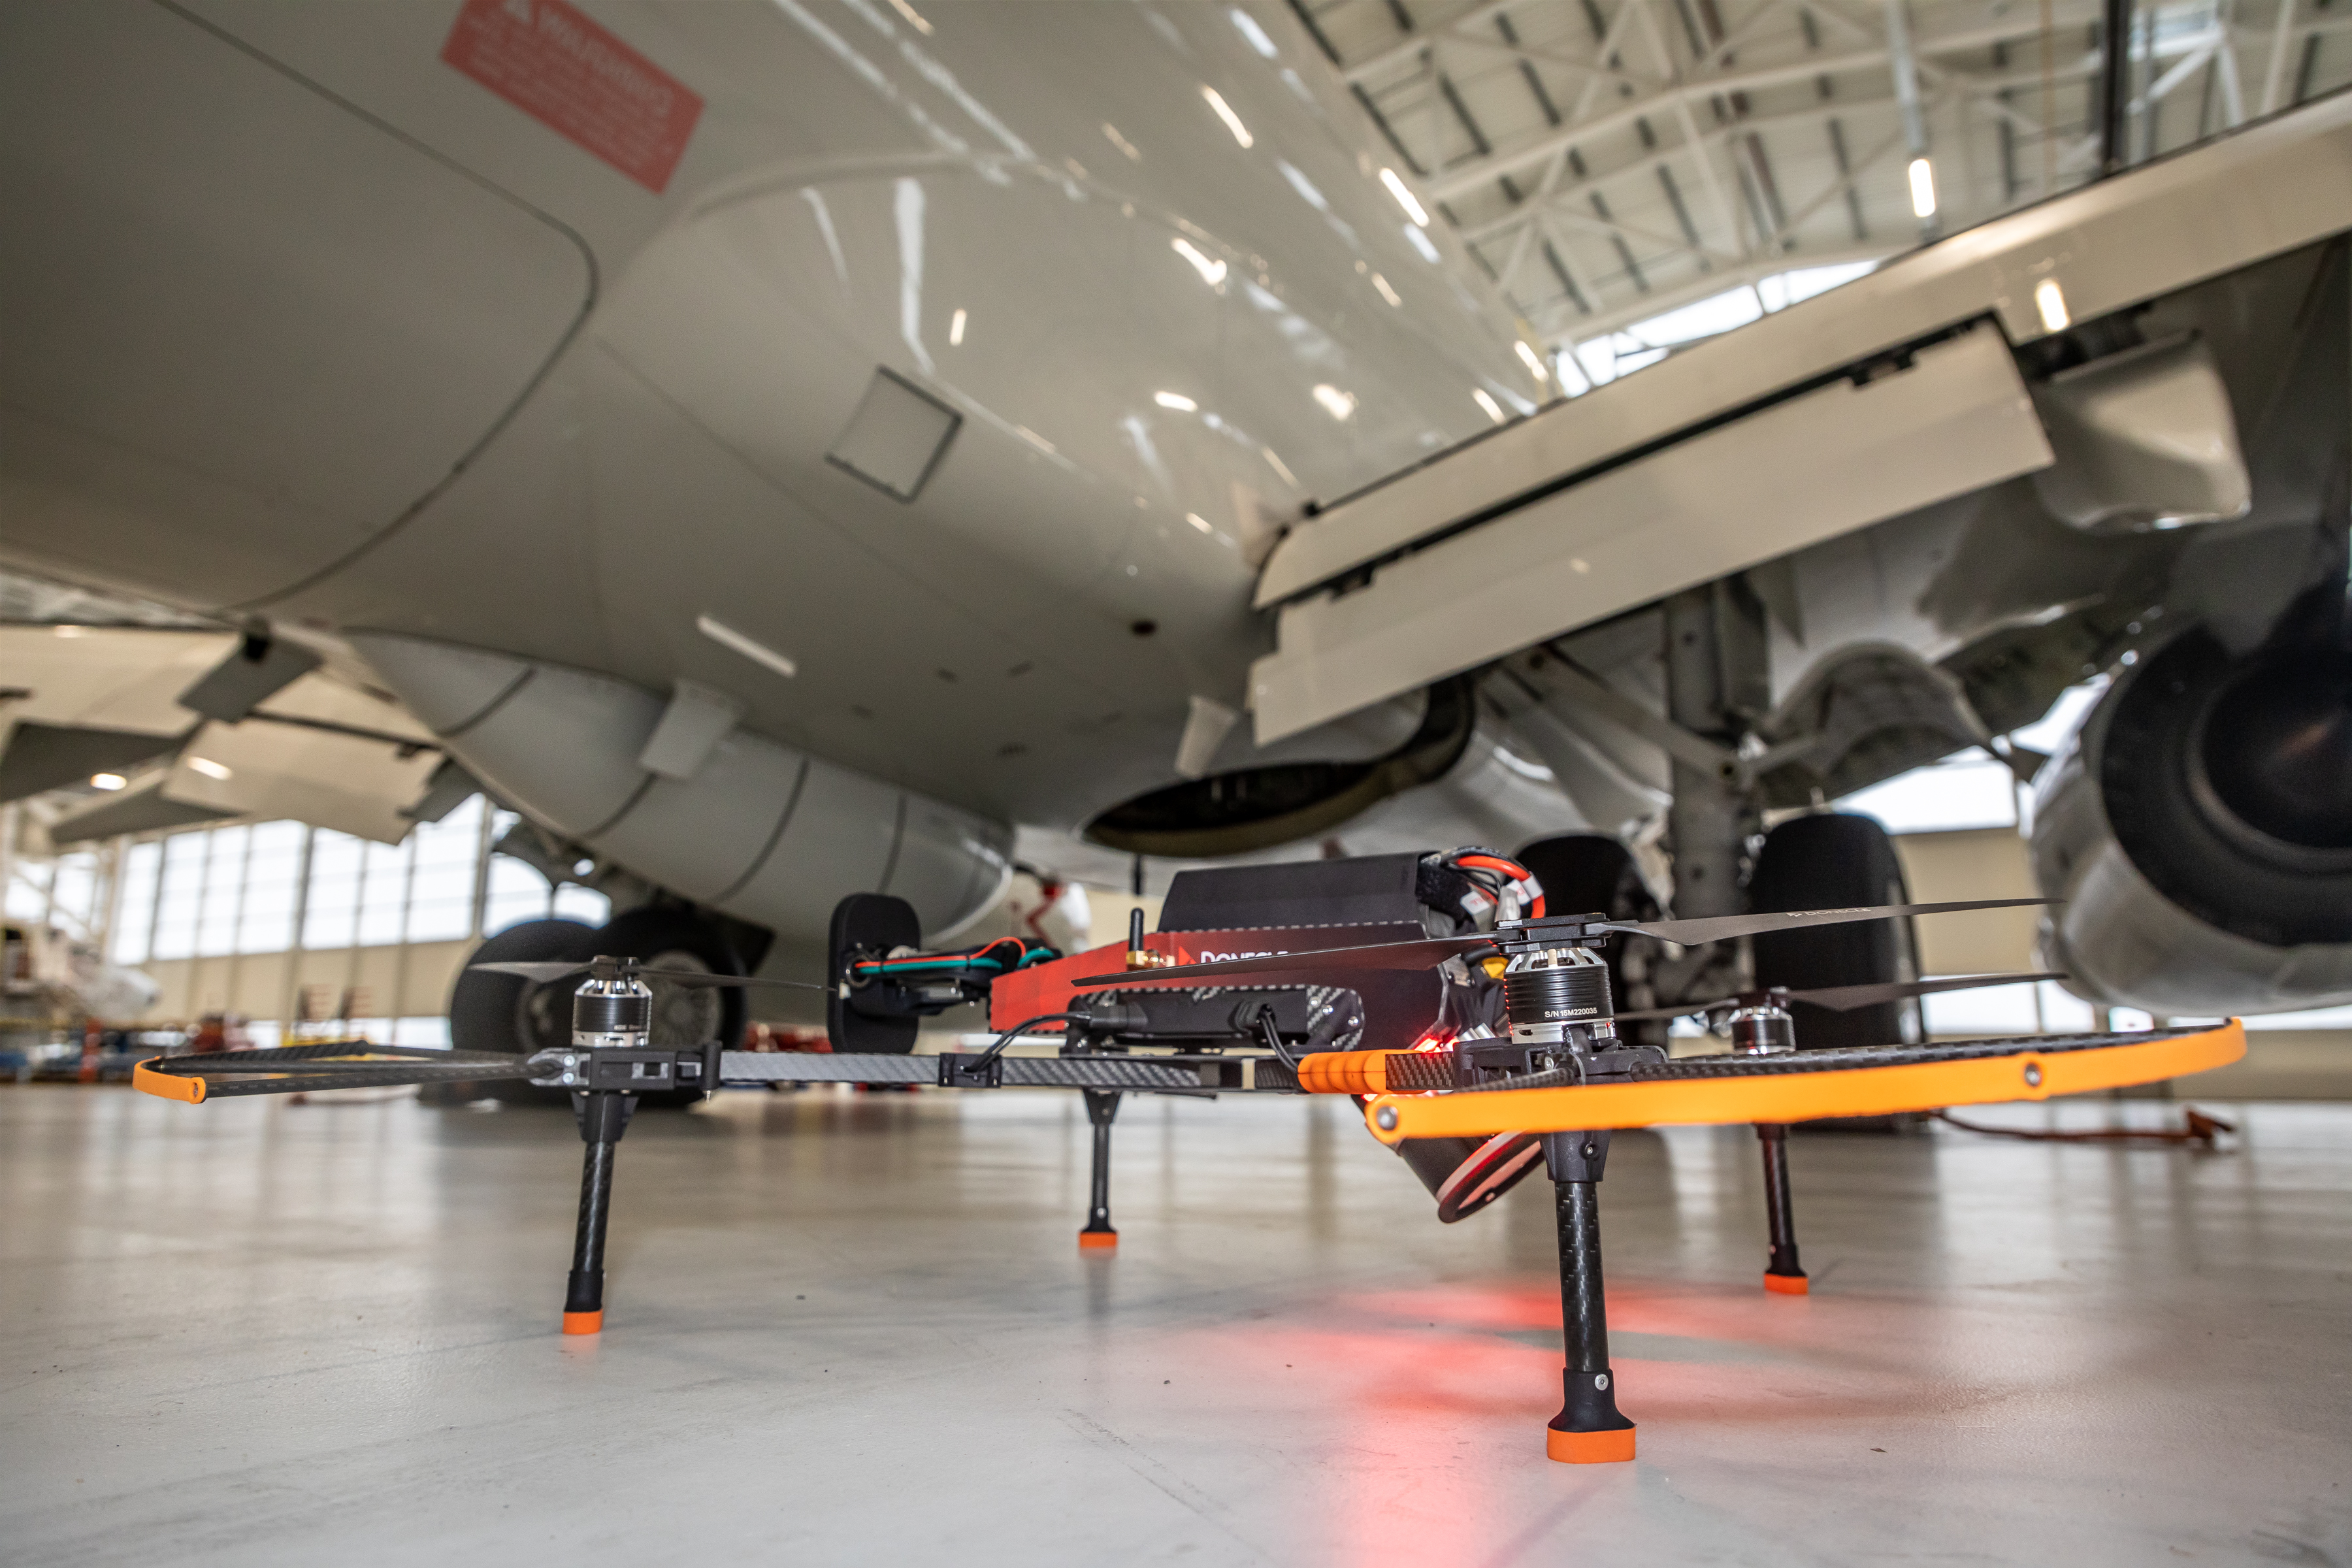 The specialist drone in front of an aircraft in a hangar